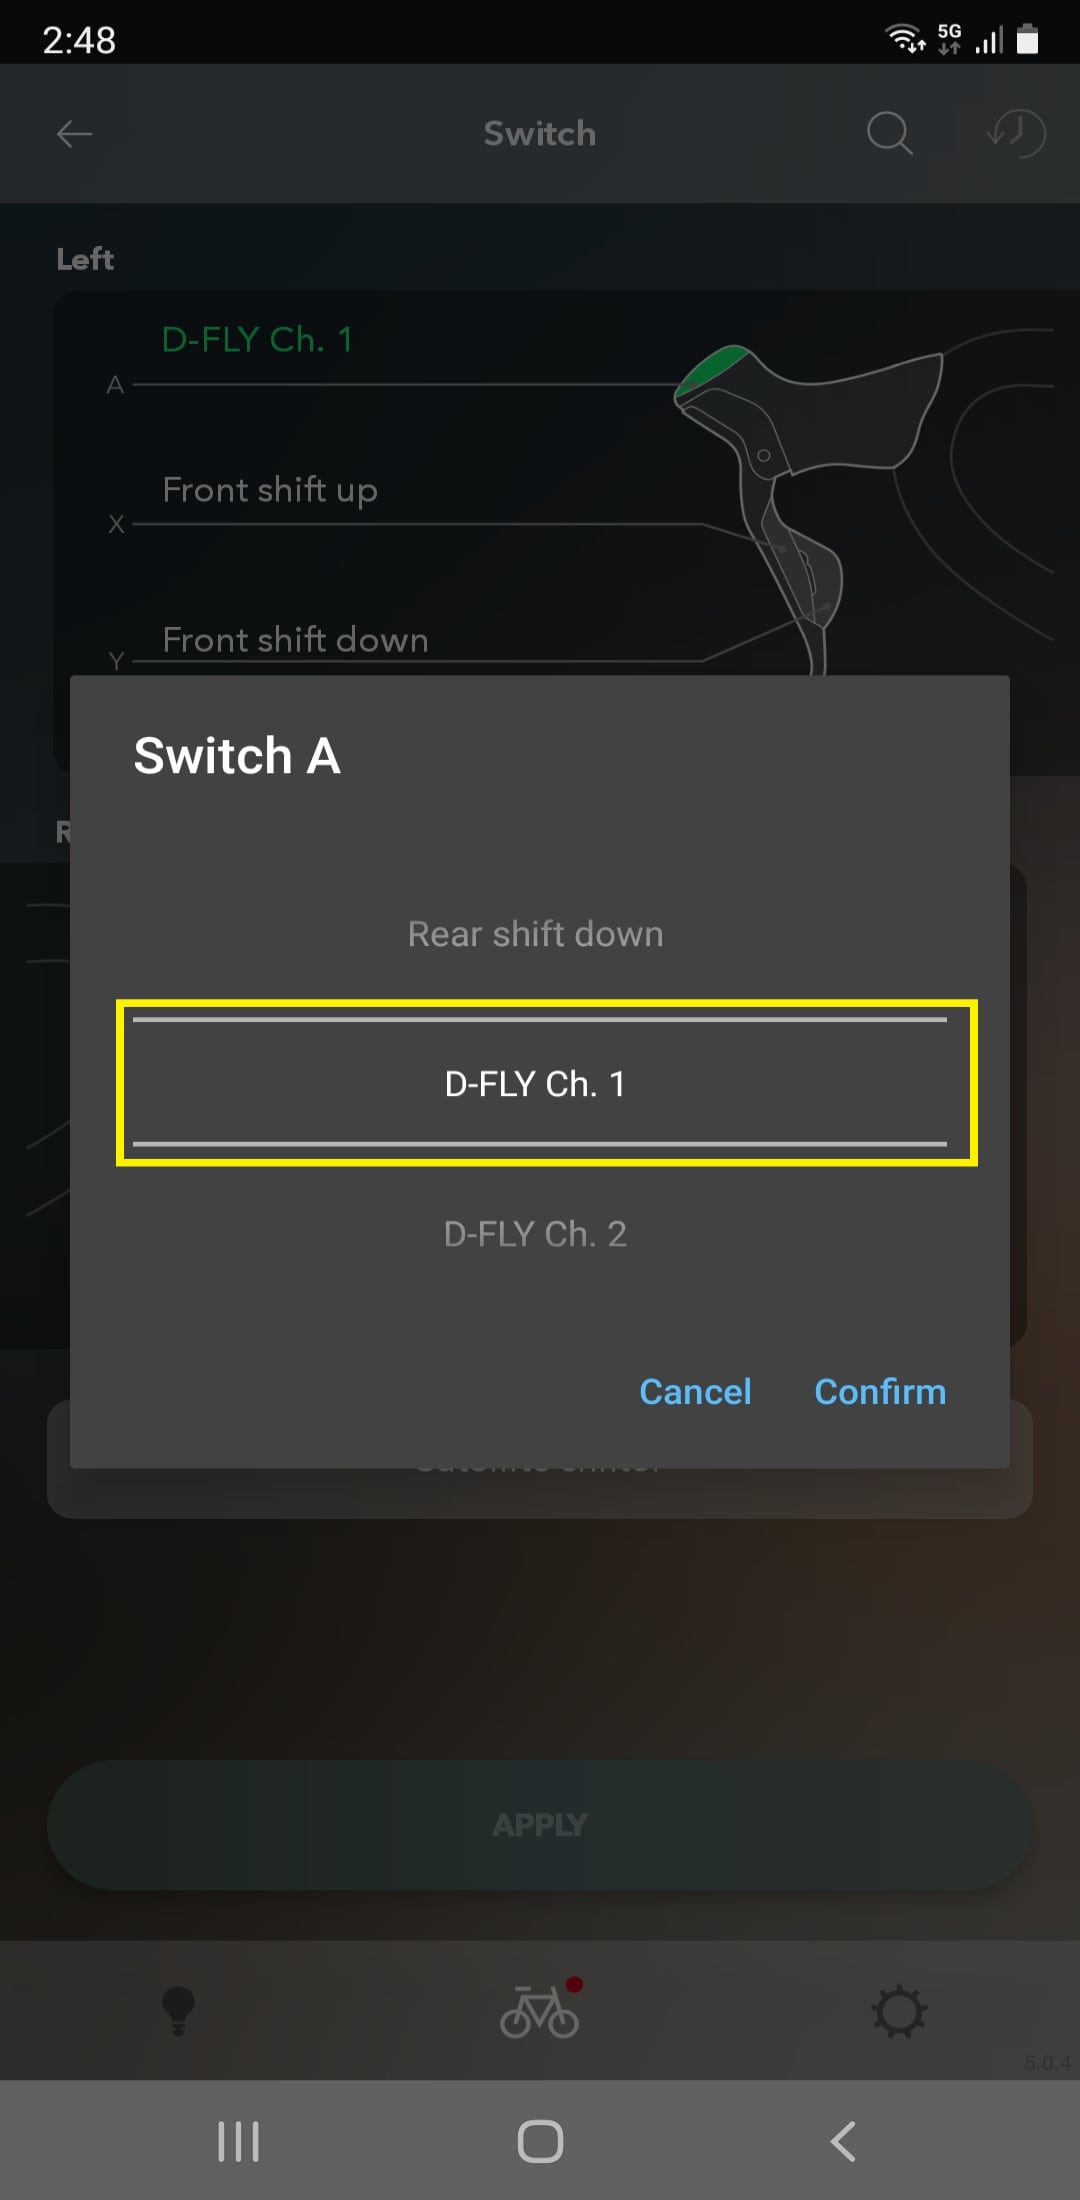 Select a D-FLY channel from 1 to 4.